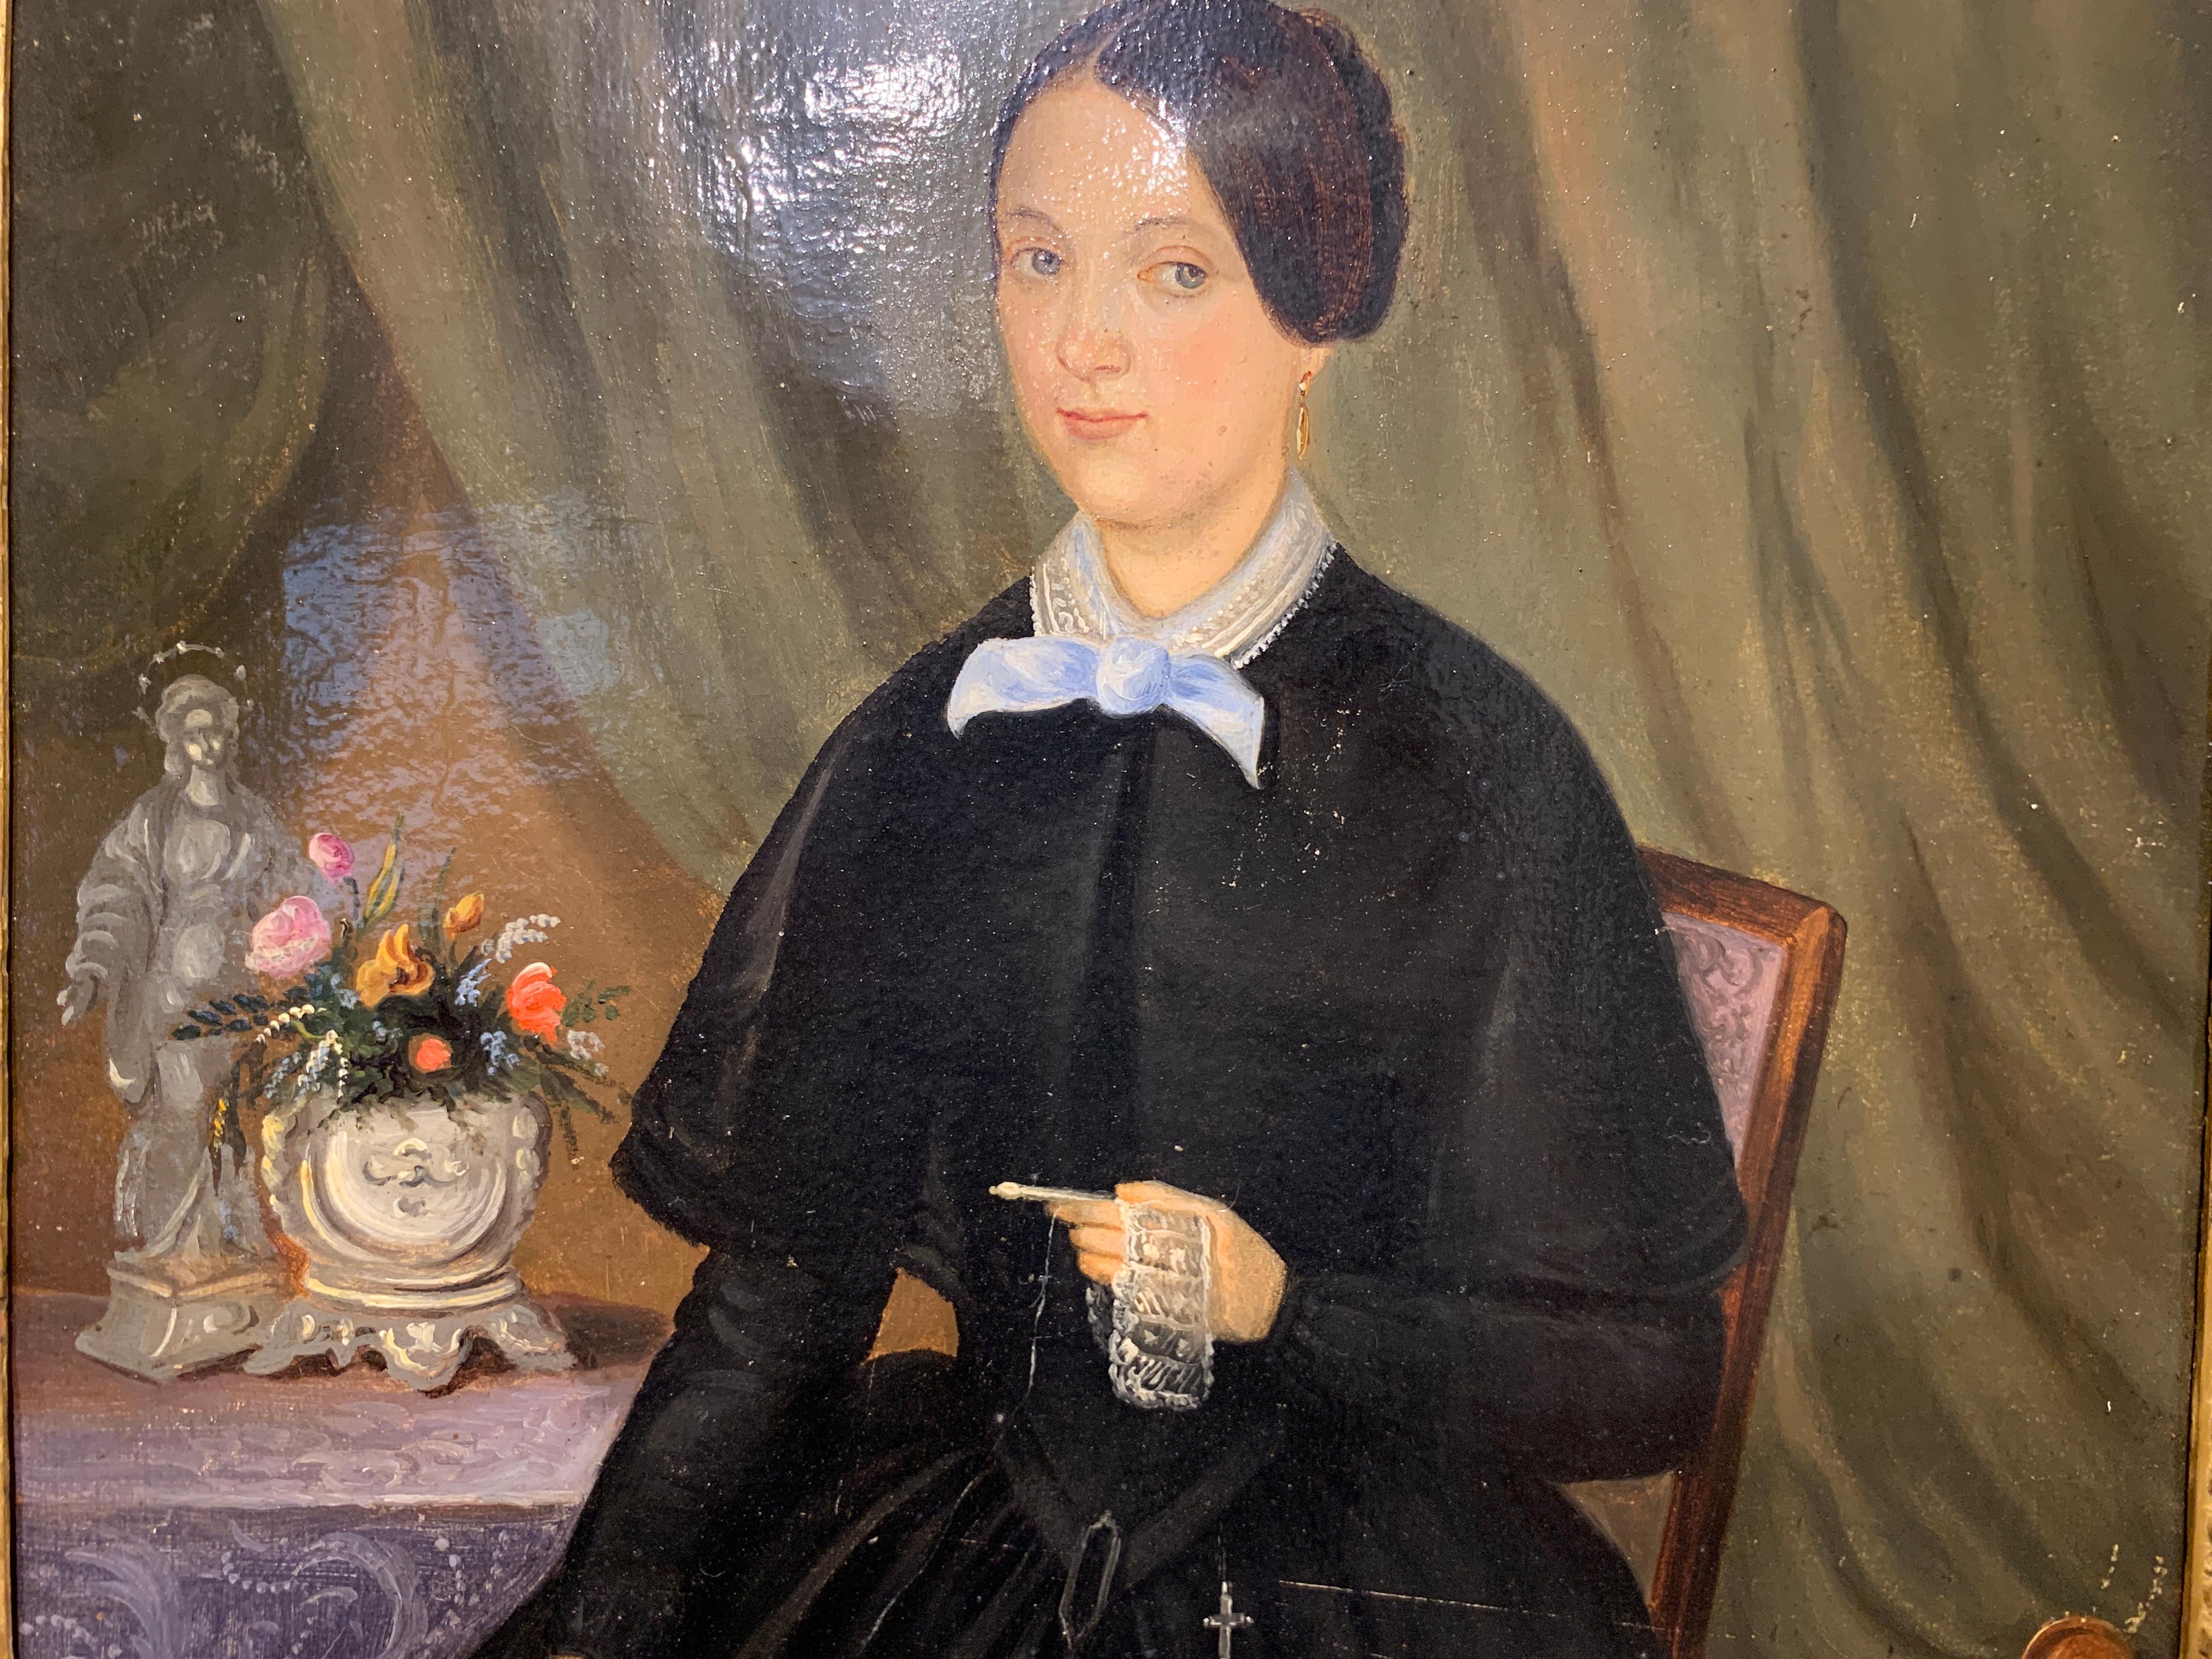 'Portrait of a Woman I' is a framed vertical oil on canvas painting depicting a 19th century woman sitting on a chair in front of a table, a large curtain behind her accentuating her presence. She is holding a lace embroidery work. Typical of